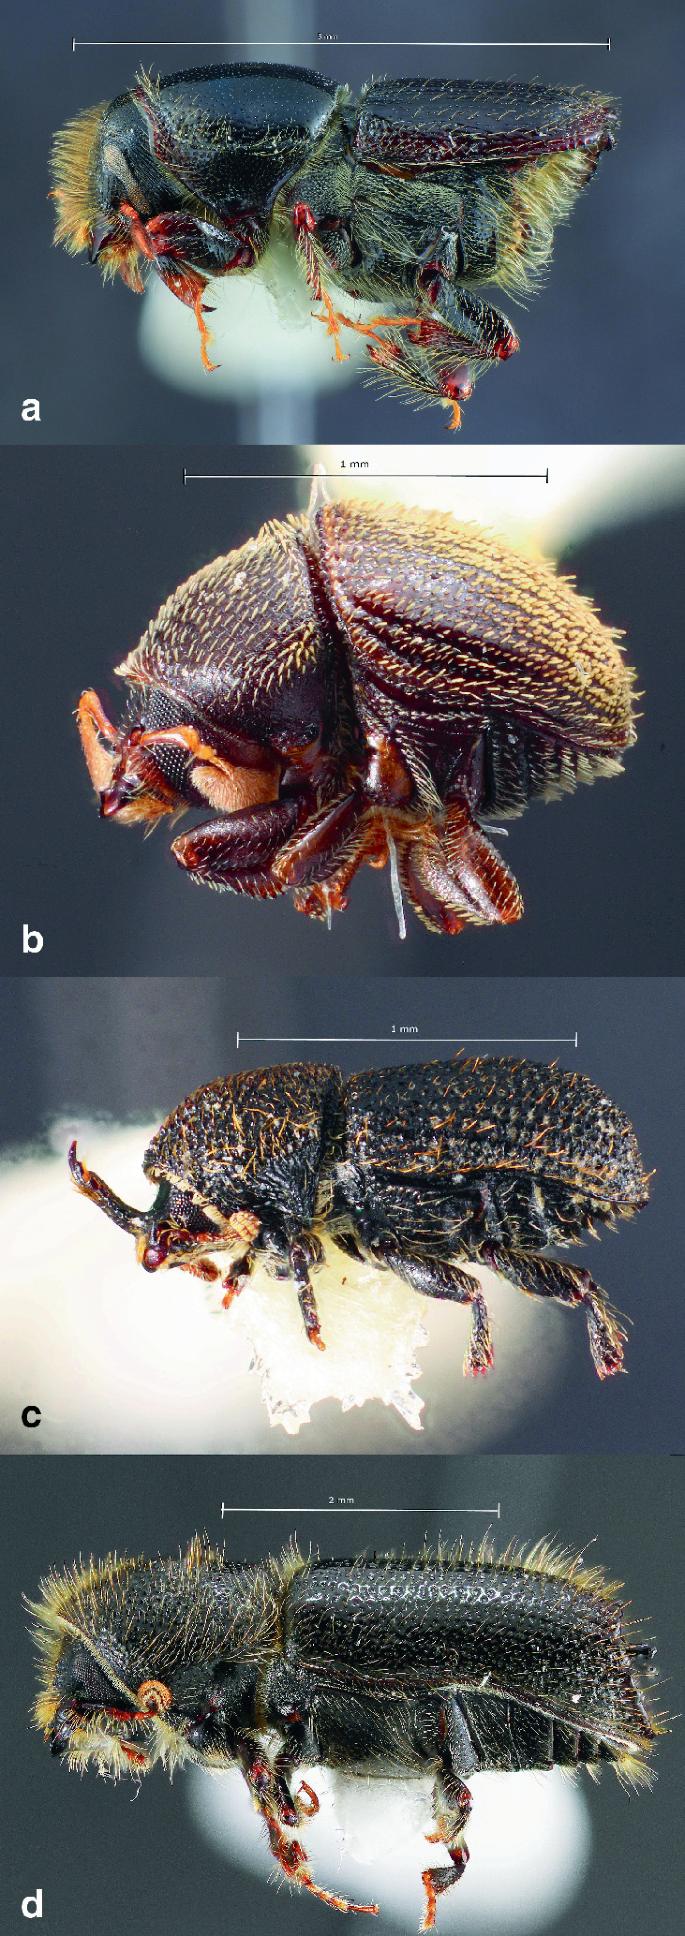 Four photos of bark beetles with measured parameters for 4 different species that range between 1 to 5 millimeters.